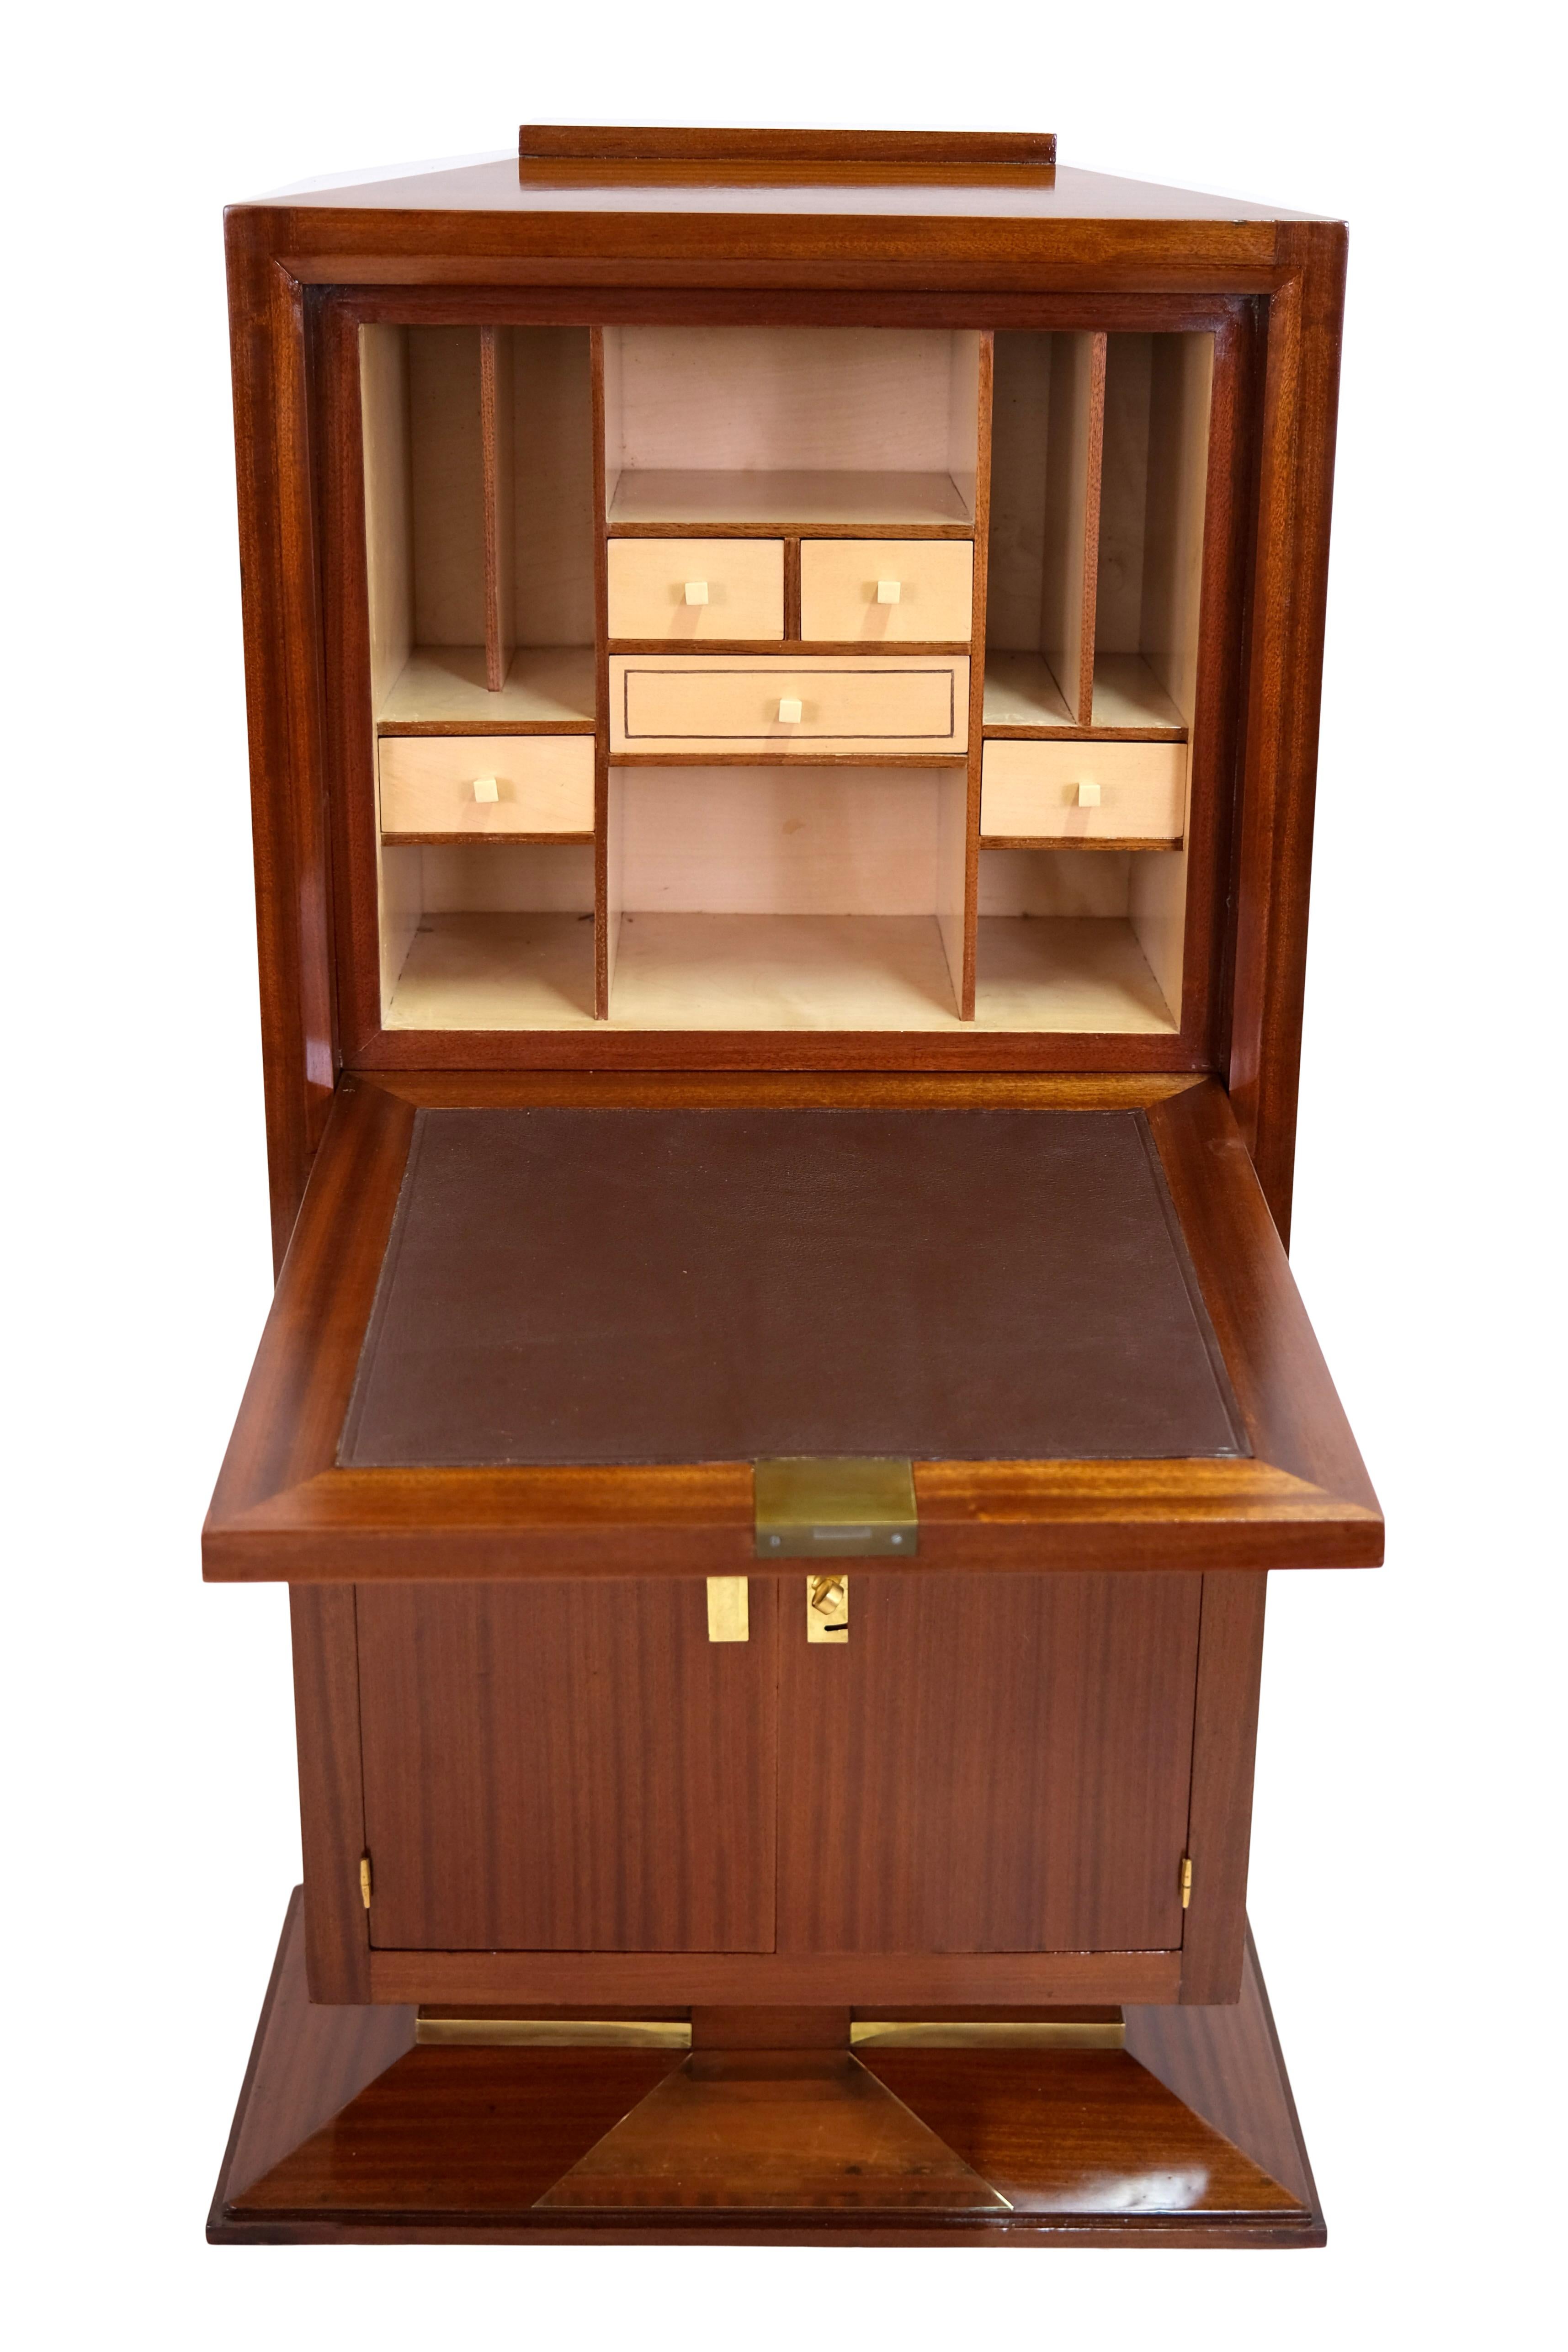 Polished 1930's Art Deco Dominique Secretaire Desk with Keyhole in the Fitting